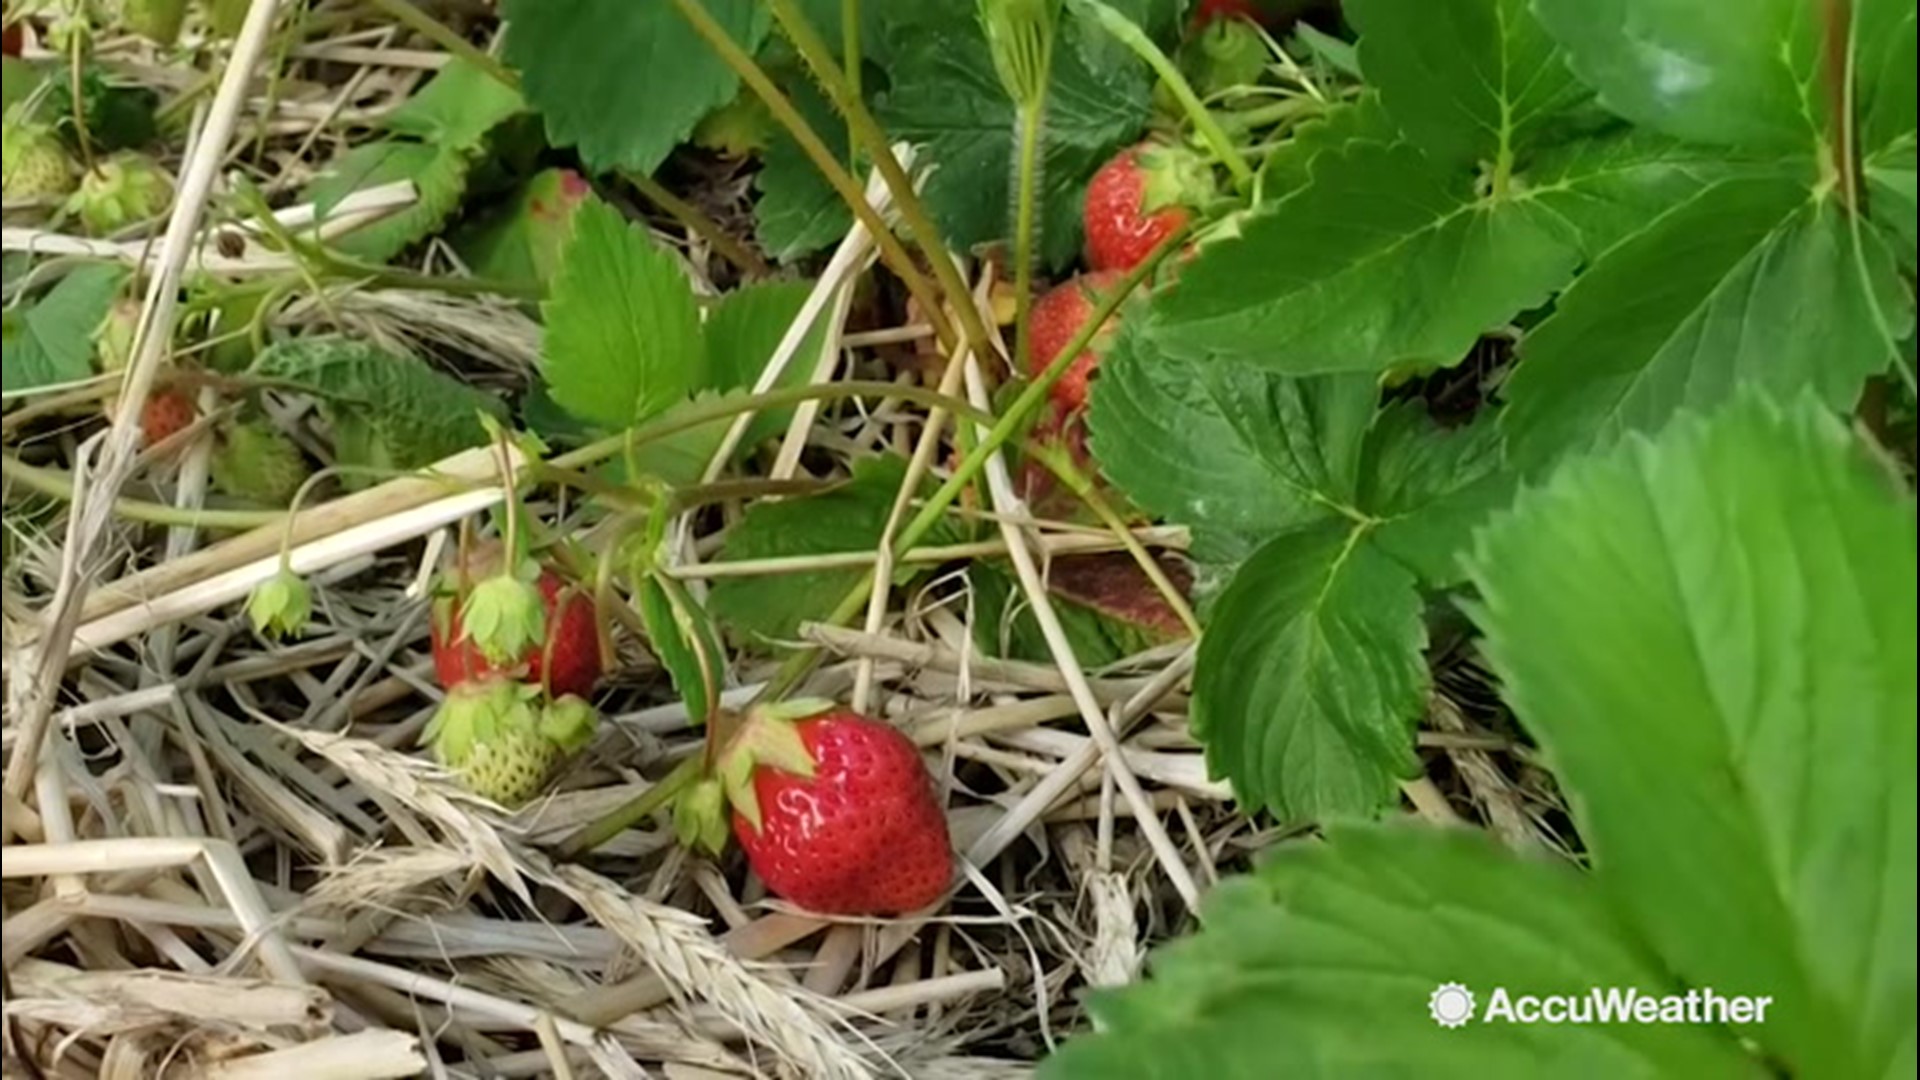 Strawberries are in peak growing season across the country and their flavor is influenced by the weather. AccuWeather's Kena Vernon shows us how it's affecting growers on the east and west coasts.